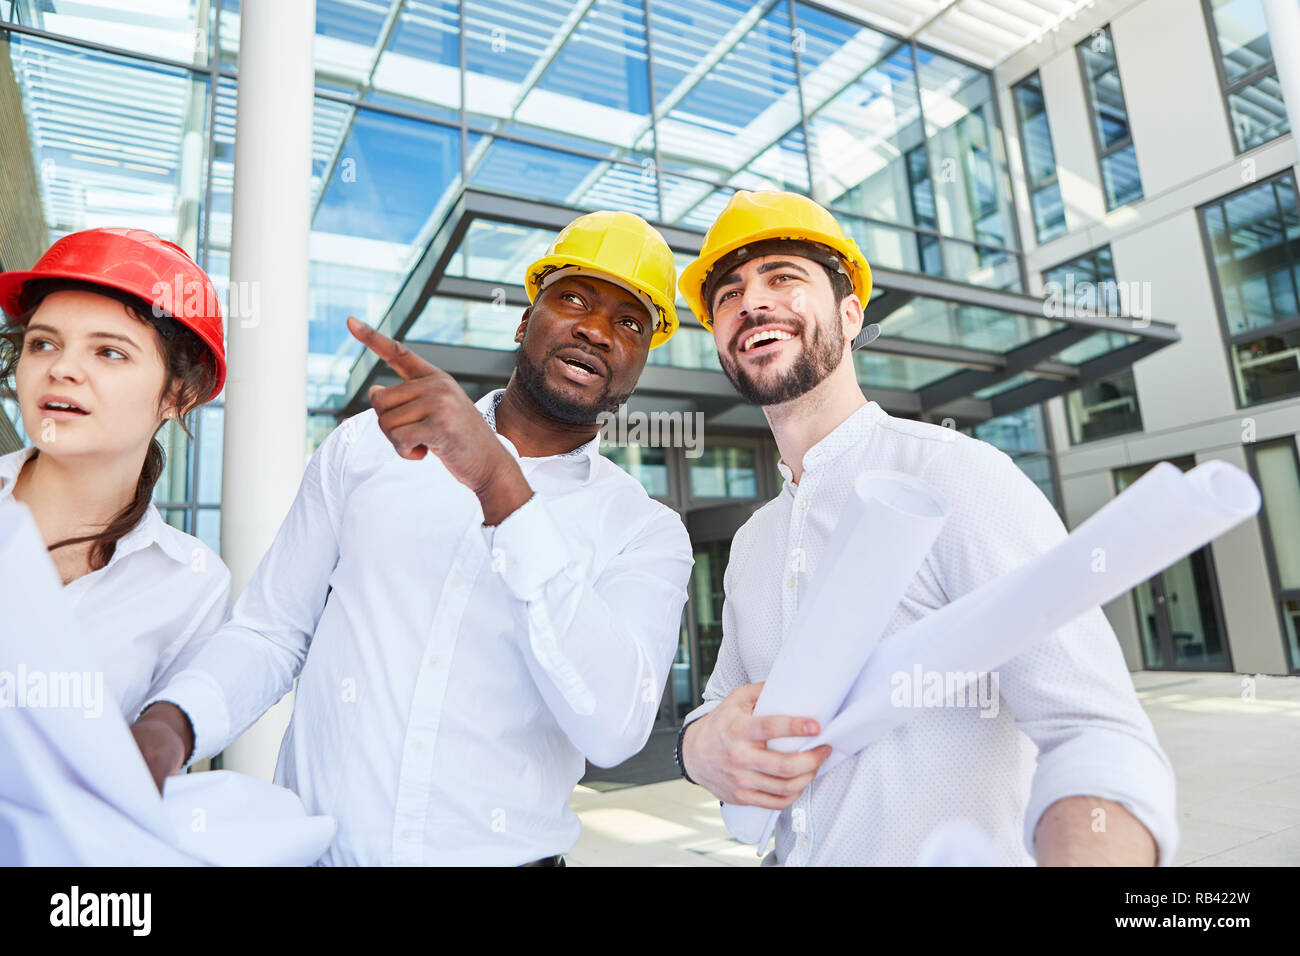 Three business people as architects in a construction planning meeting Stock Photo